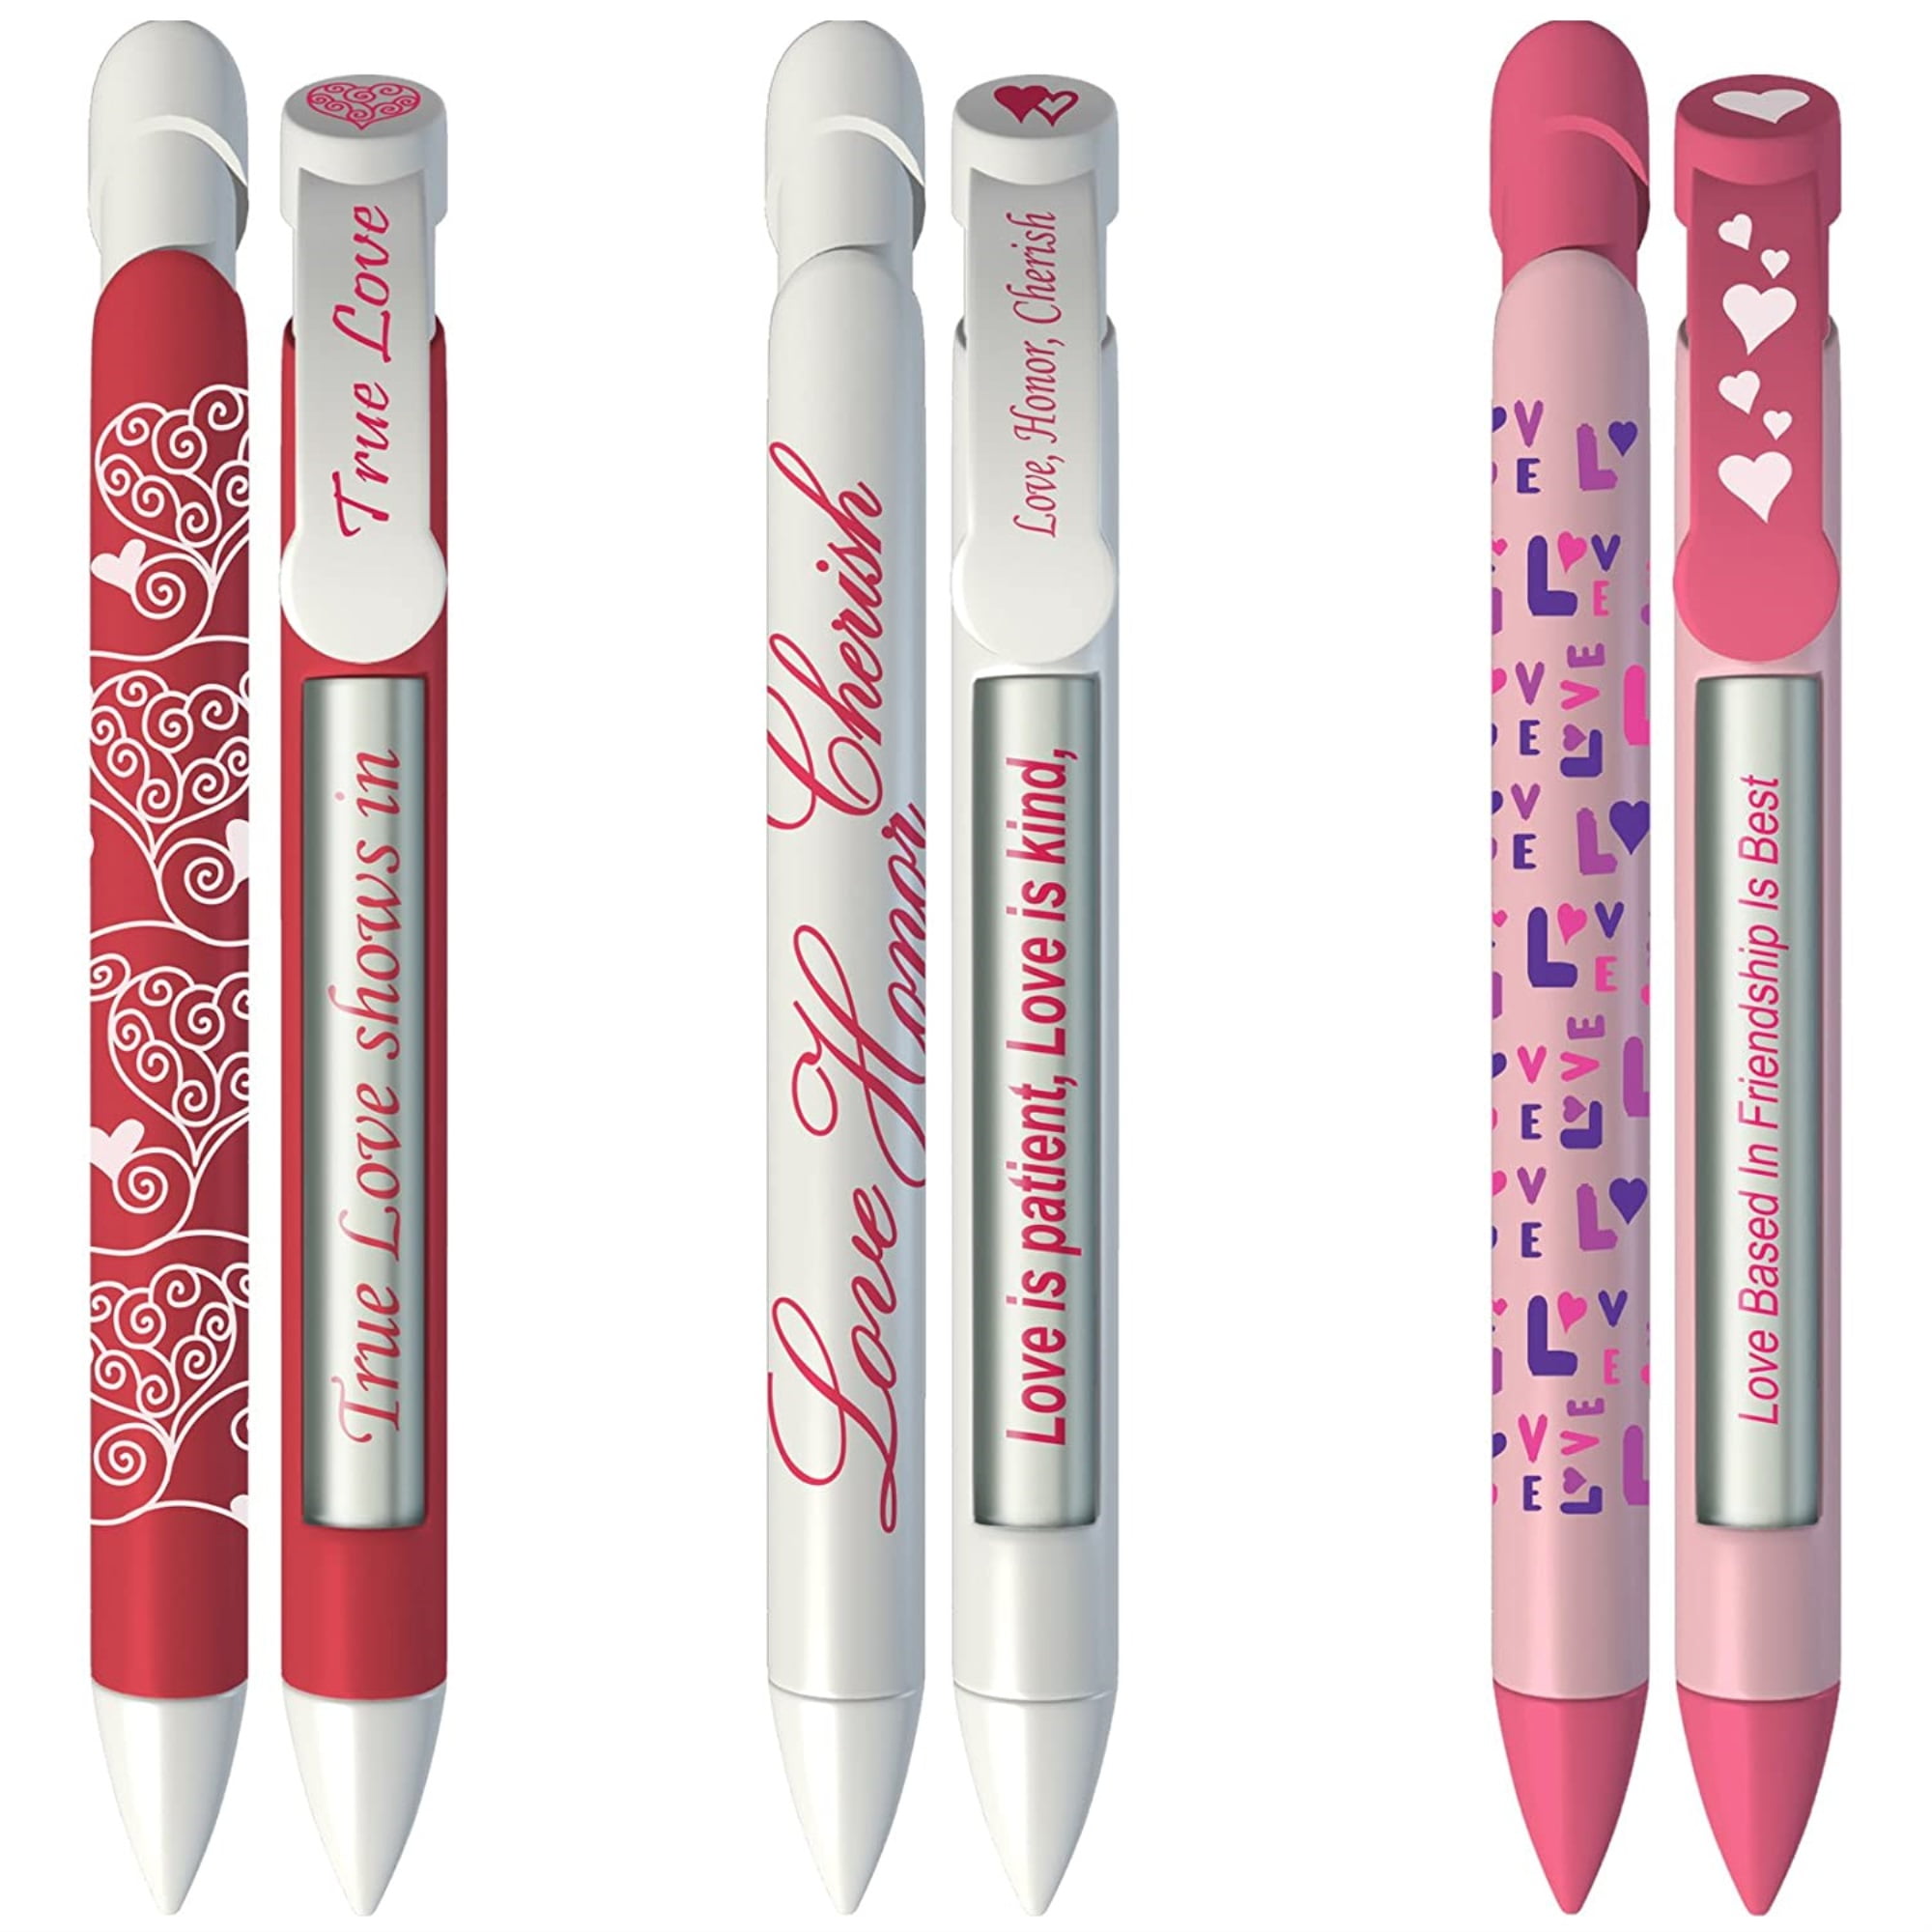 Greeting Pen Valentine's Day Pens- Love Rotating Message 6 Pen